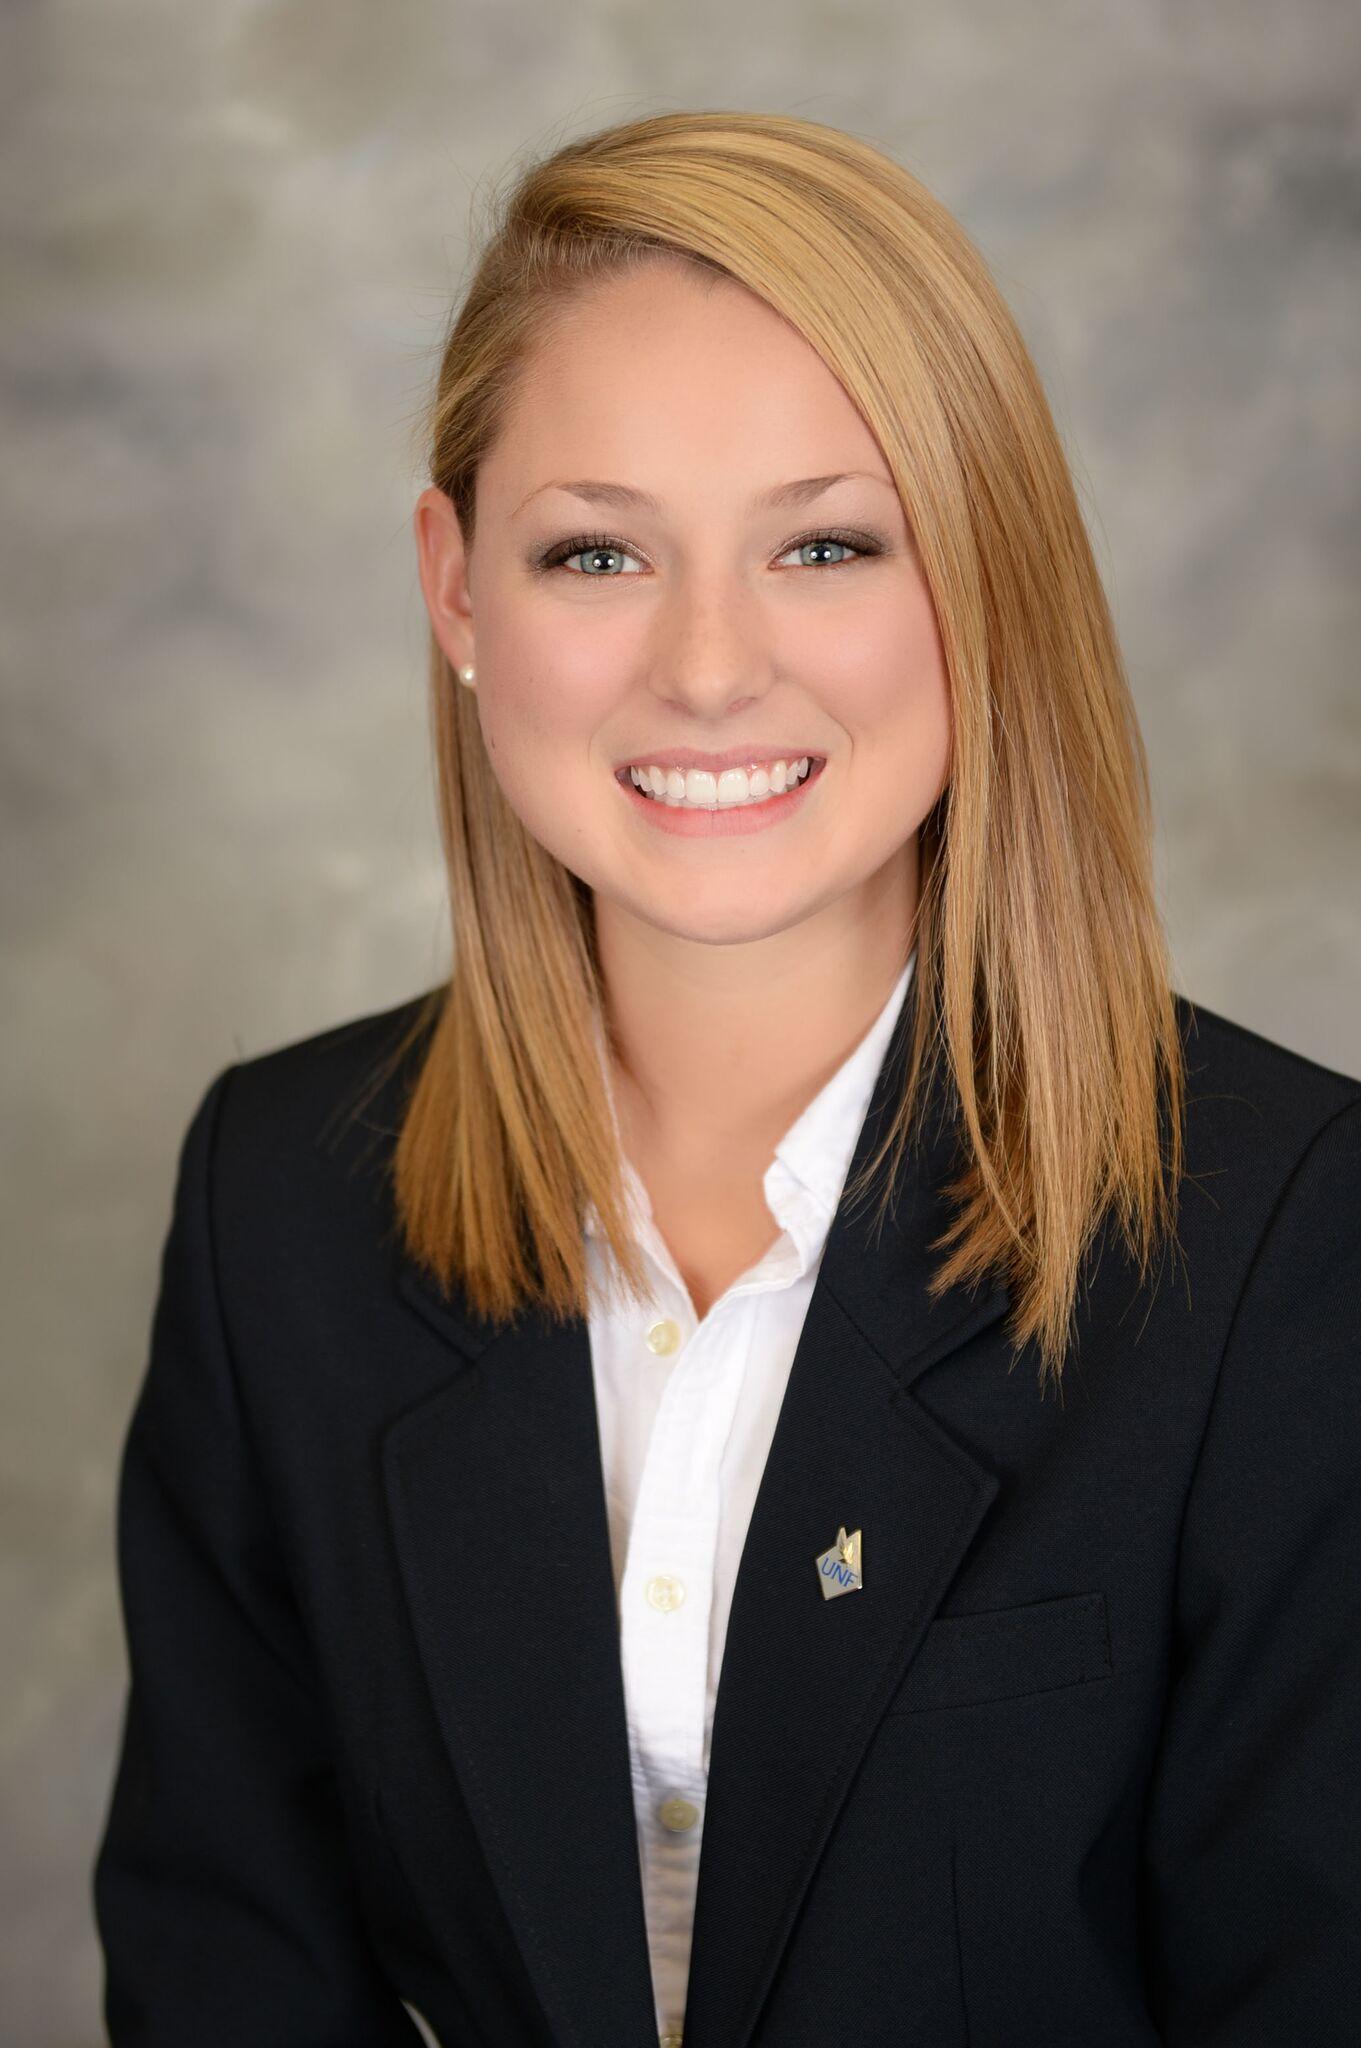 Caroline Dodd started out in the Presidential Envoys during her freshman year and is now the student president of the program.